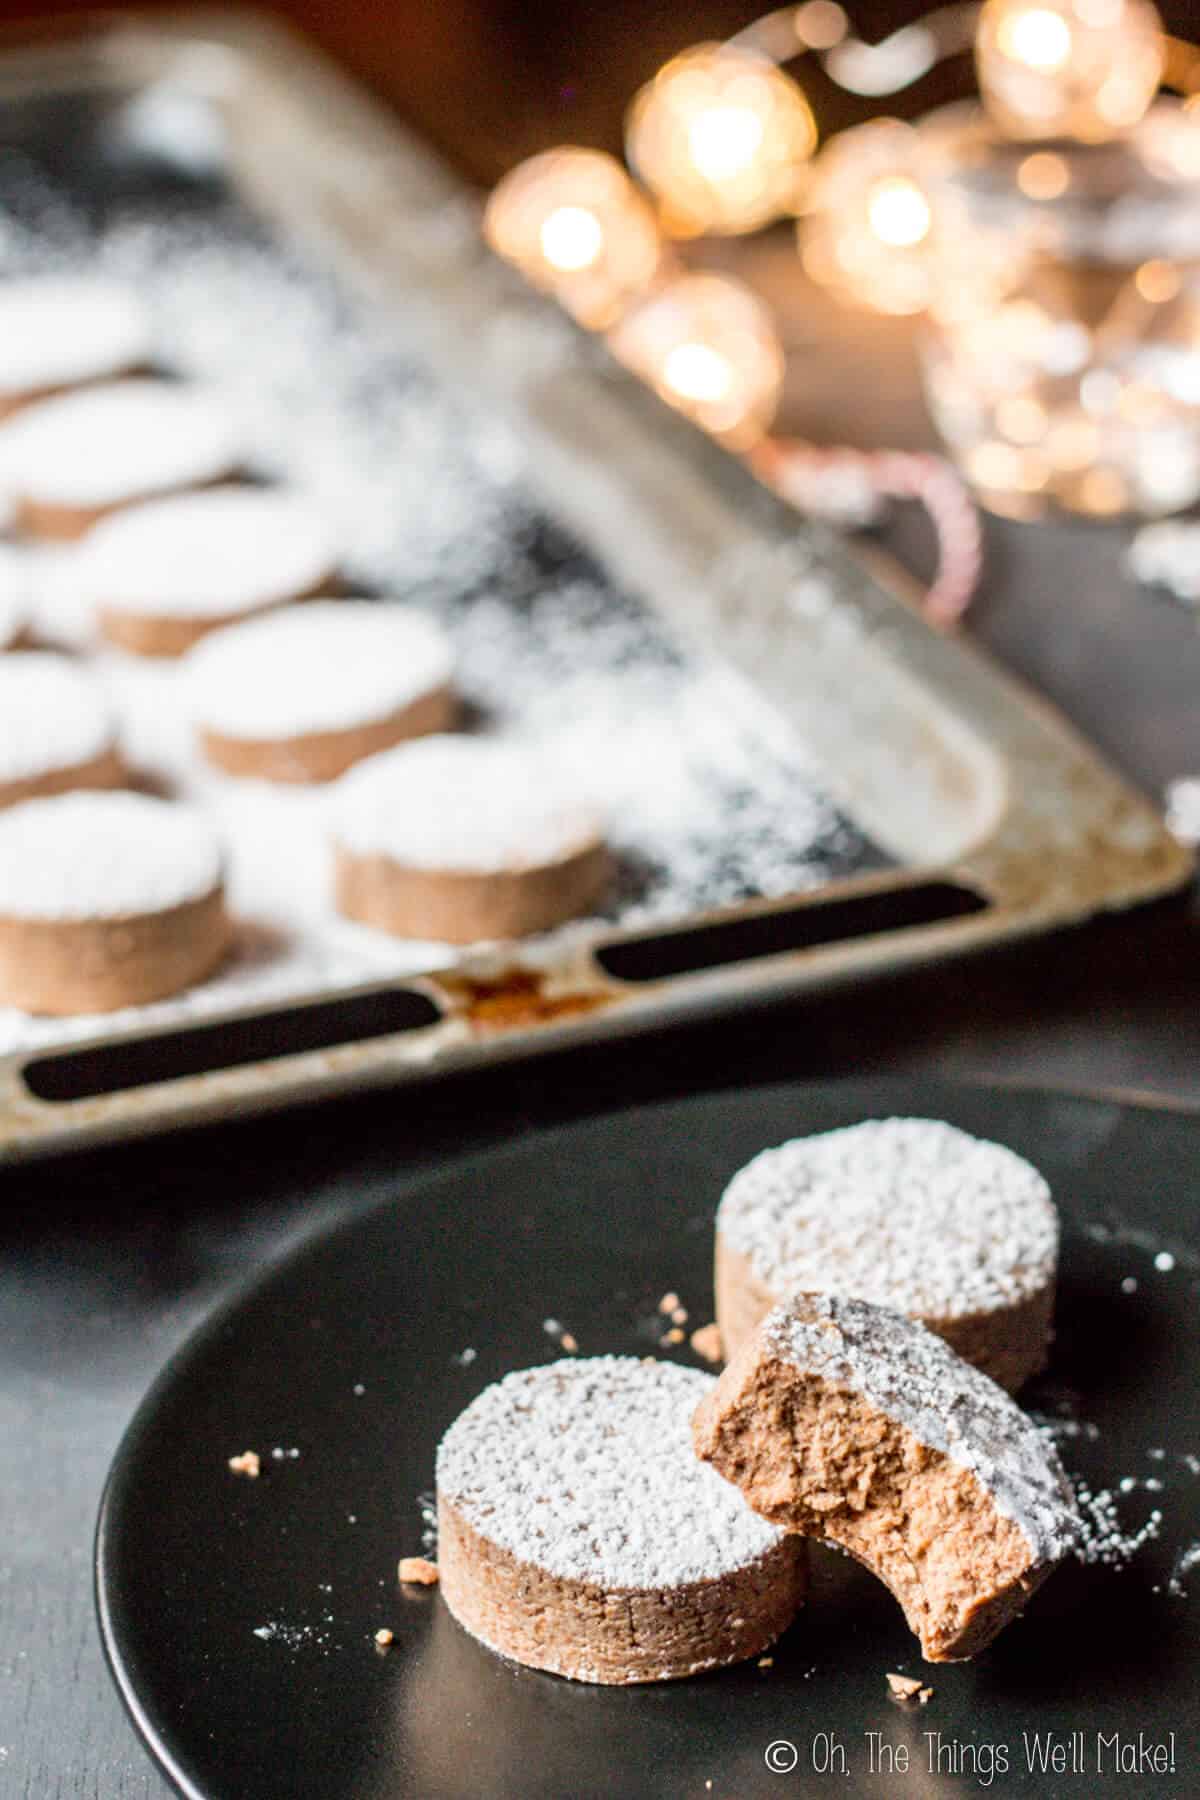 This mantecado and Spanish polvorón recipe will allow even those following a gluten free or grain free diet to enjoy these soft and crumbly Spanish Christmas cookies.